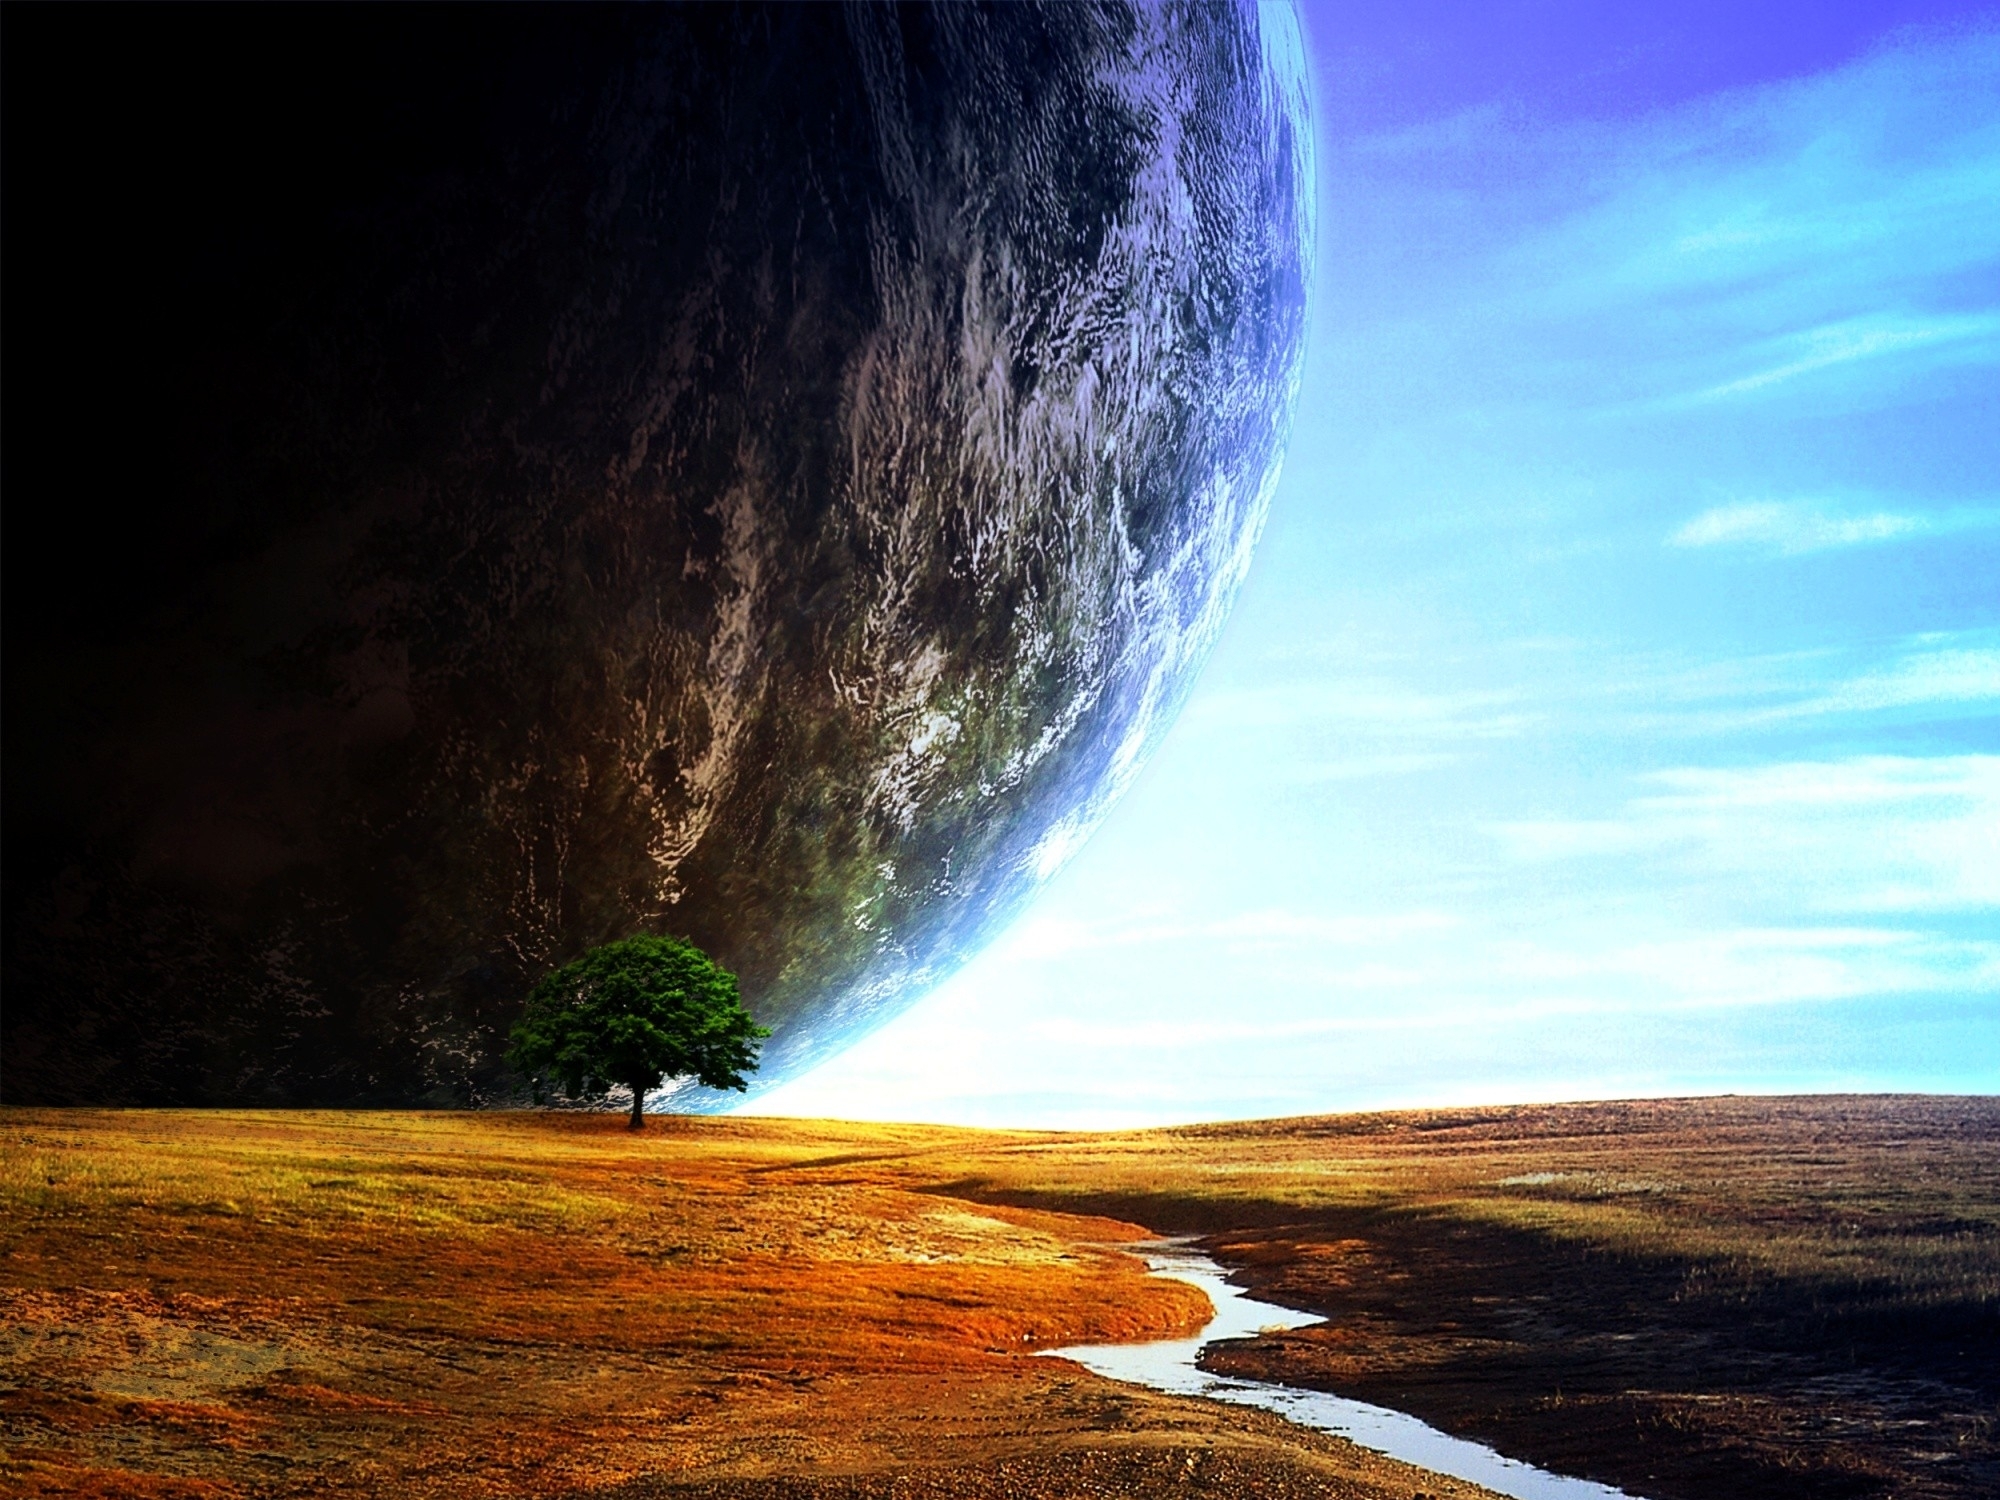 planets, Sci fi, Space, Nature, Trees, Landscapes, Cg, Digtal, Art, Stream, Sky, Clouds Wallpaper